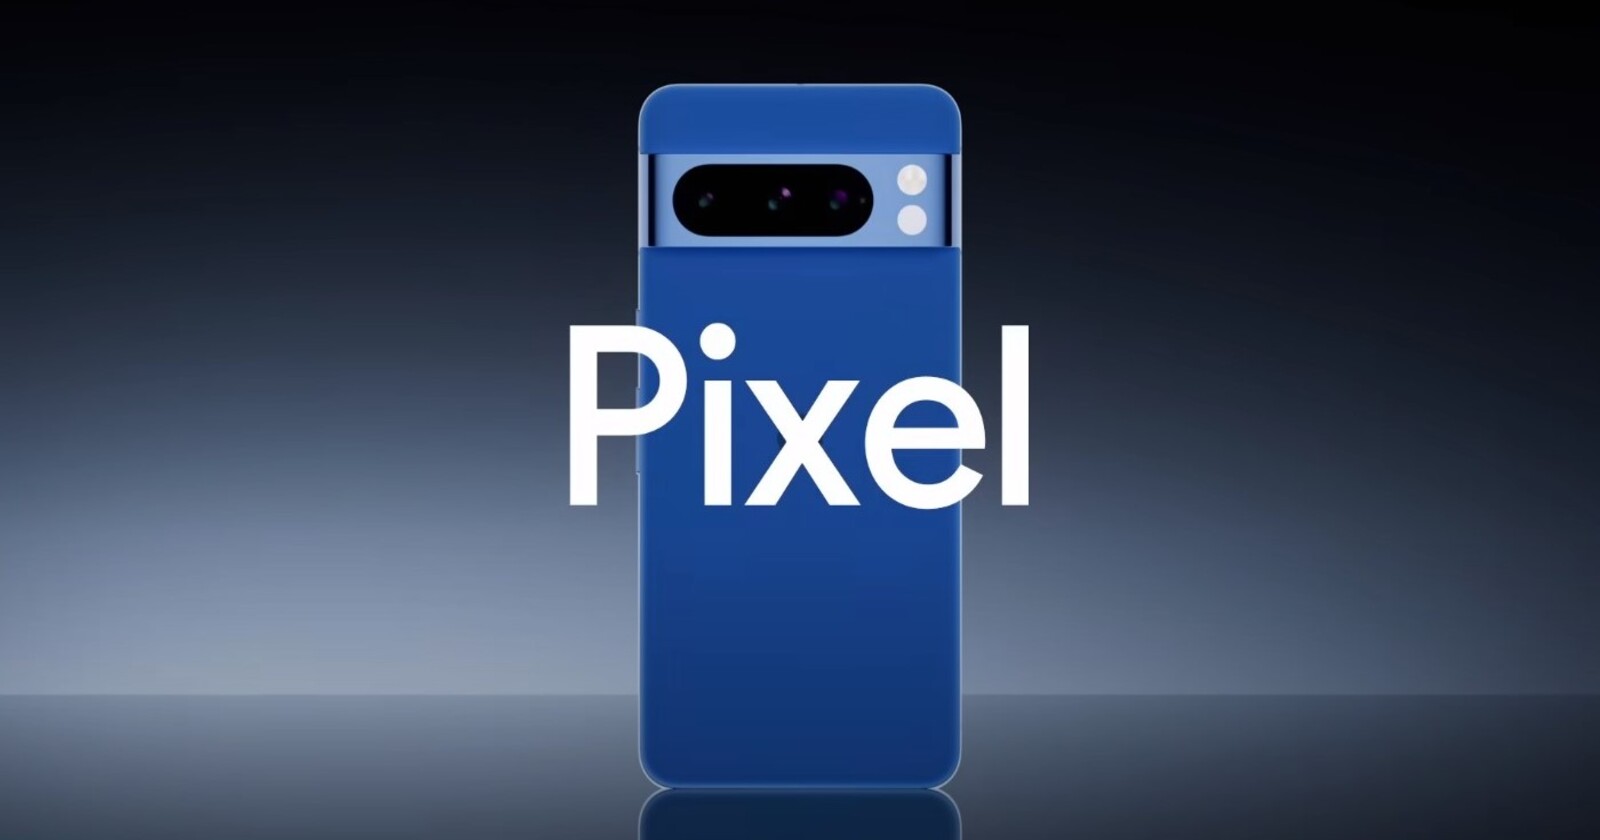 Pixel devices 'Clear Calling' now powered by new Google's Research team ML model; Pixel Aligned Language Models in development